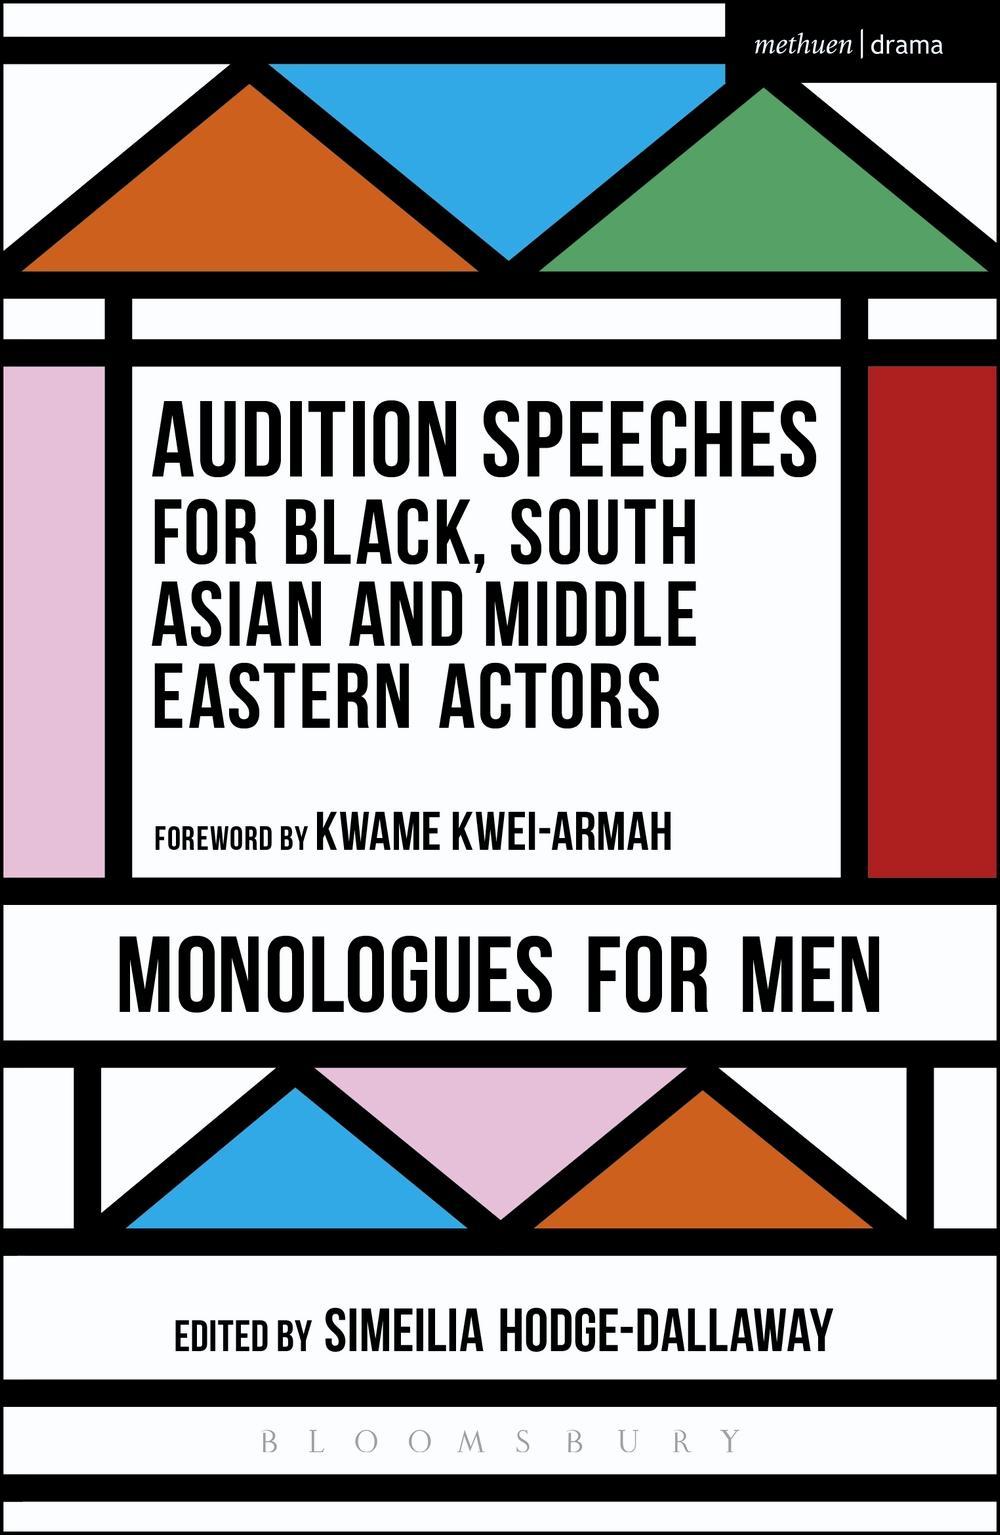 Audition Speeches for Black, South Asian and Middle Eastern